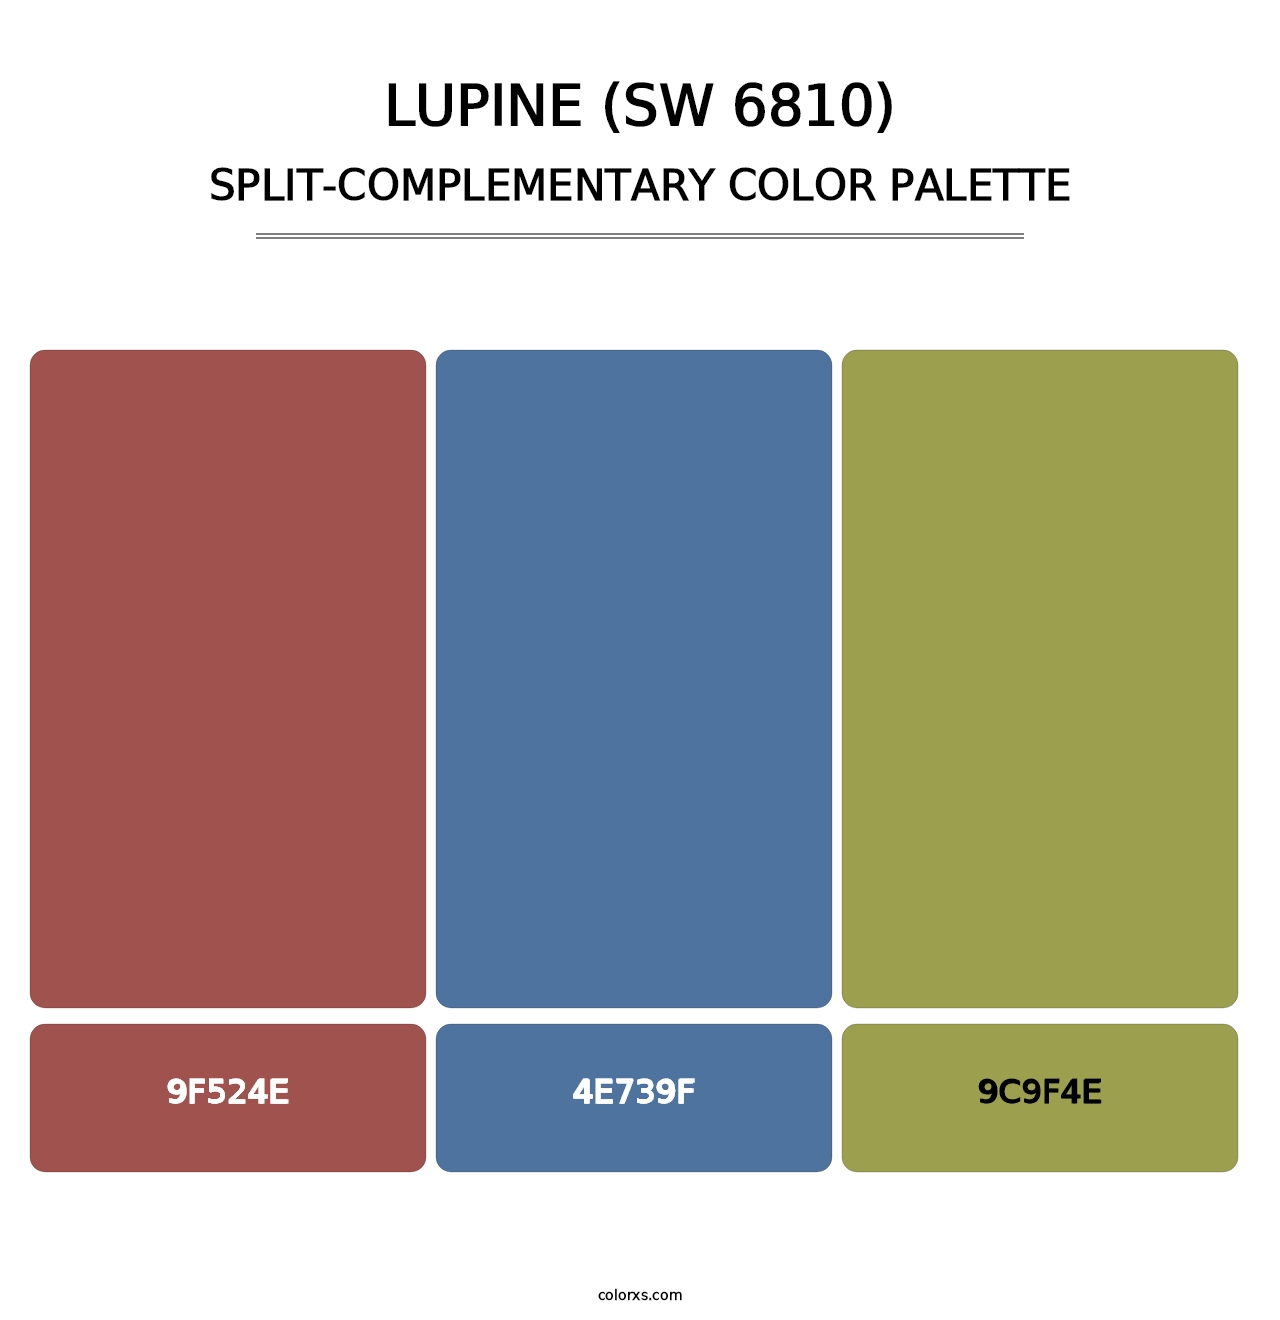 Lupine (SW 6810) - Split-Complementary Color Palette